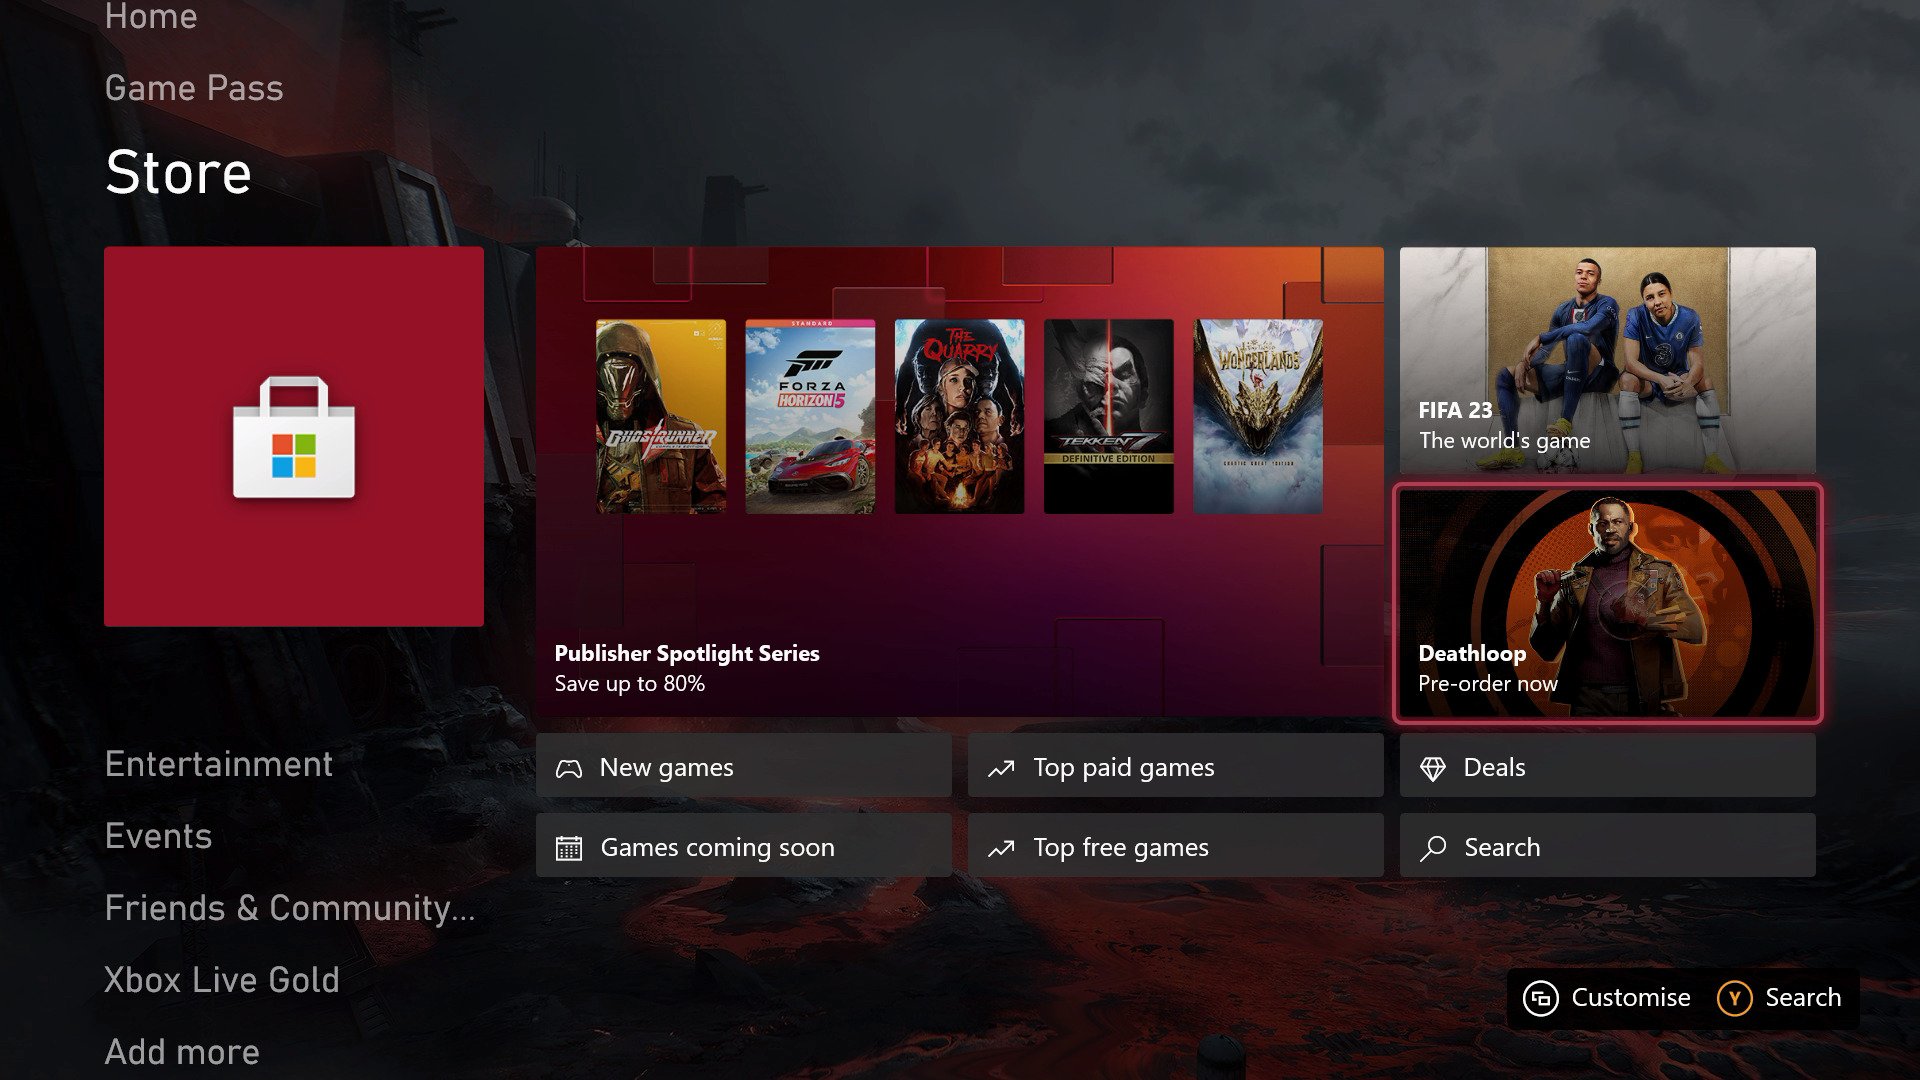 Xbox Game Pass adds new titles for September 2022: Deathloop